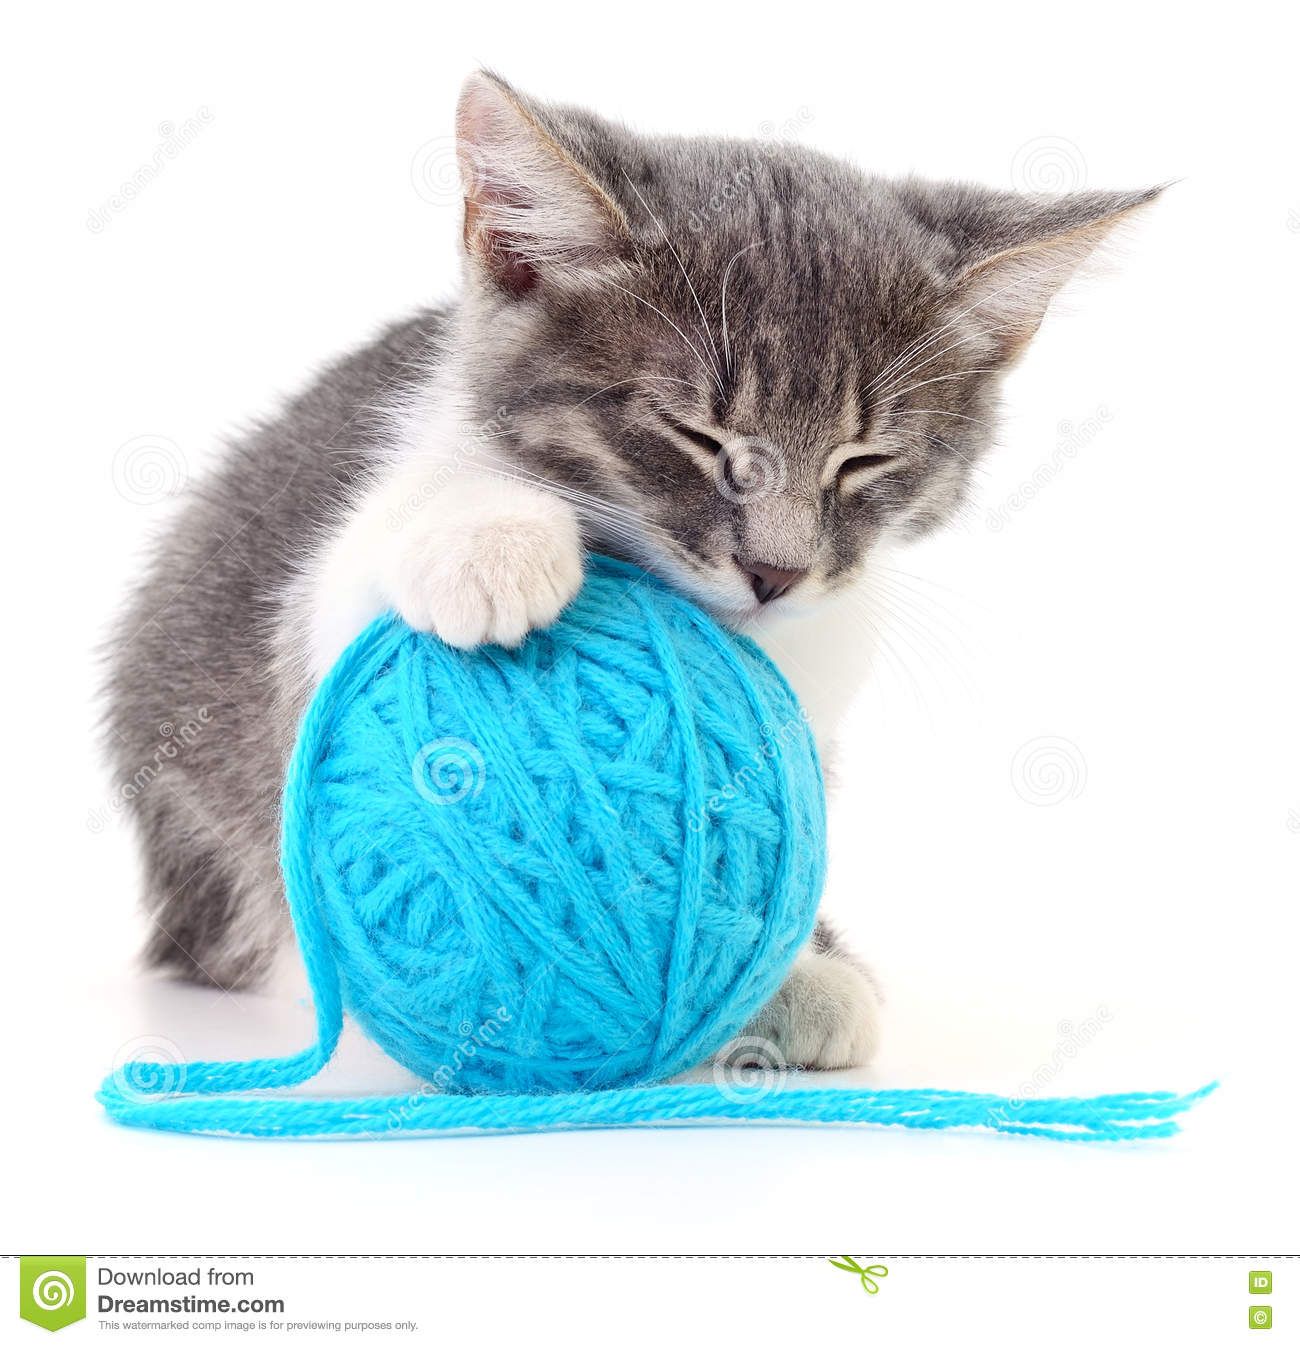 cat-ball-yarn-small-funny-kitten-clew-thread-white-background-77602283.jpg